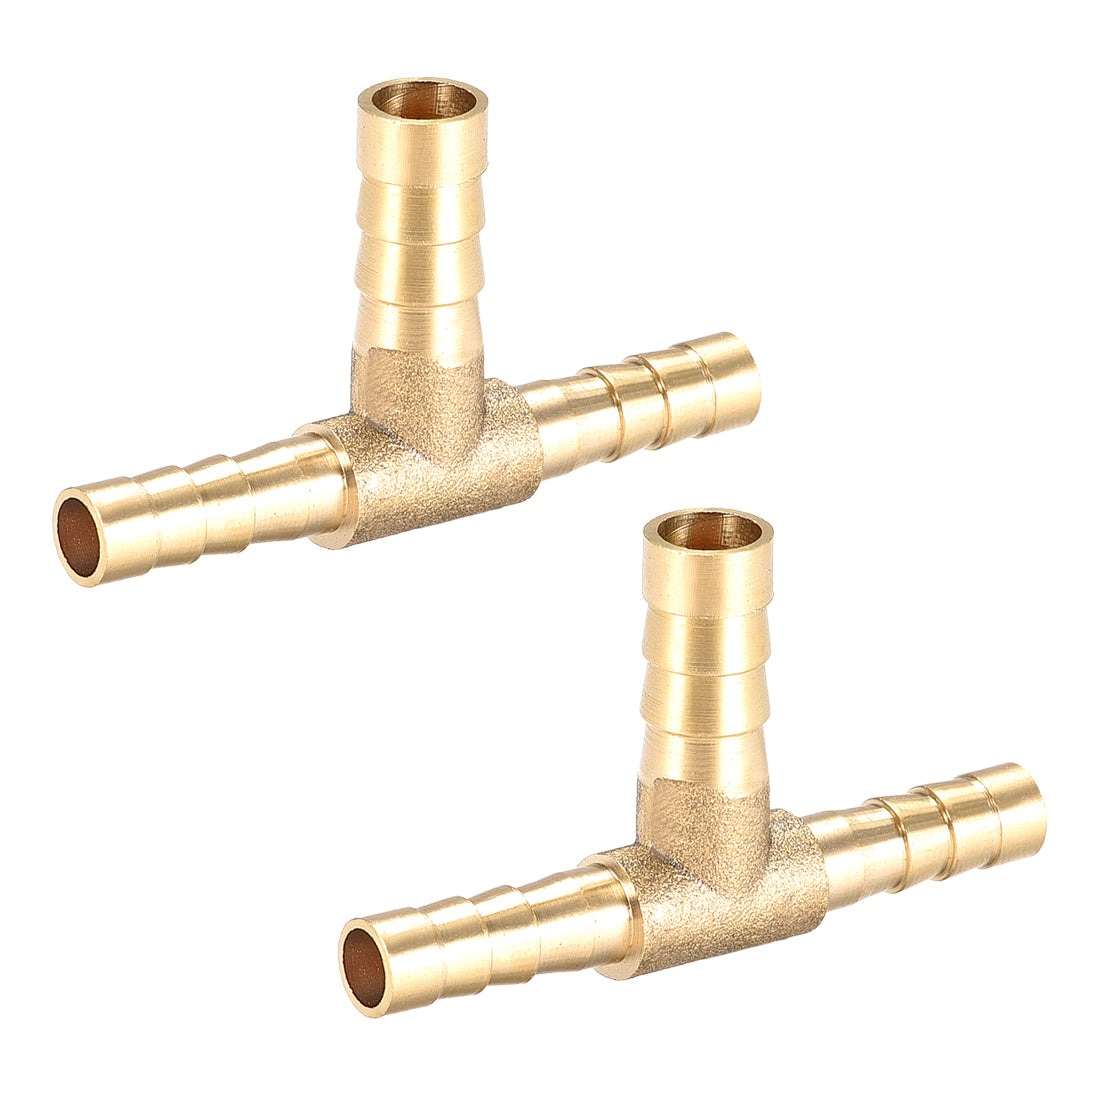 Uxcell Uxcell Tee Brass Barb Fitting Reducer 3 Way, Fit Hose ID 8x10x8mm 2pcs